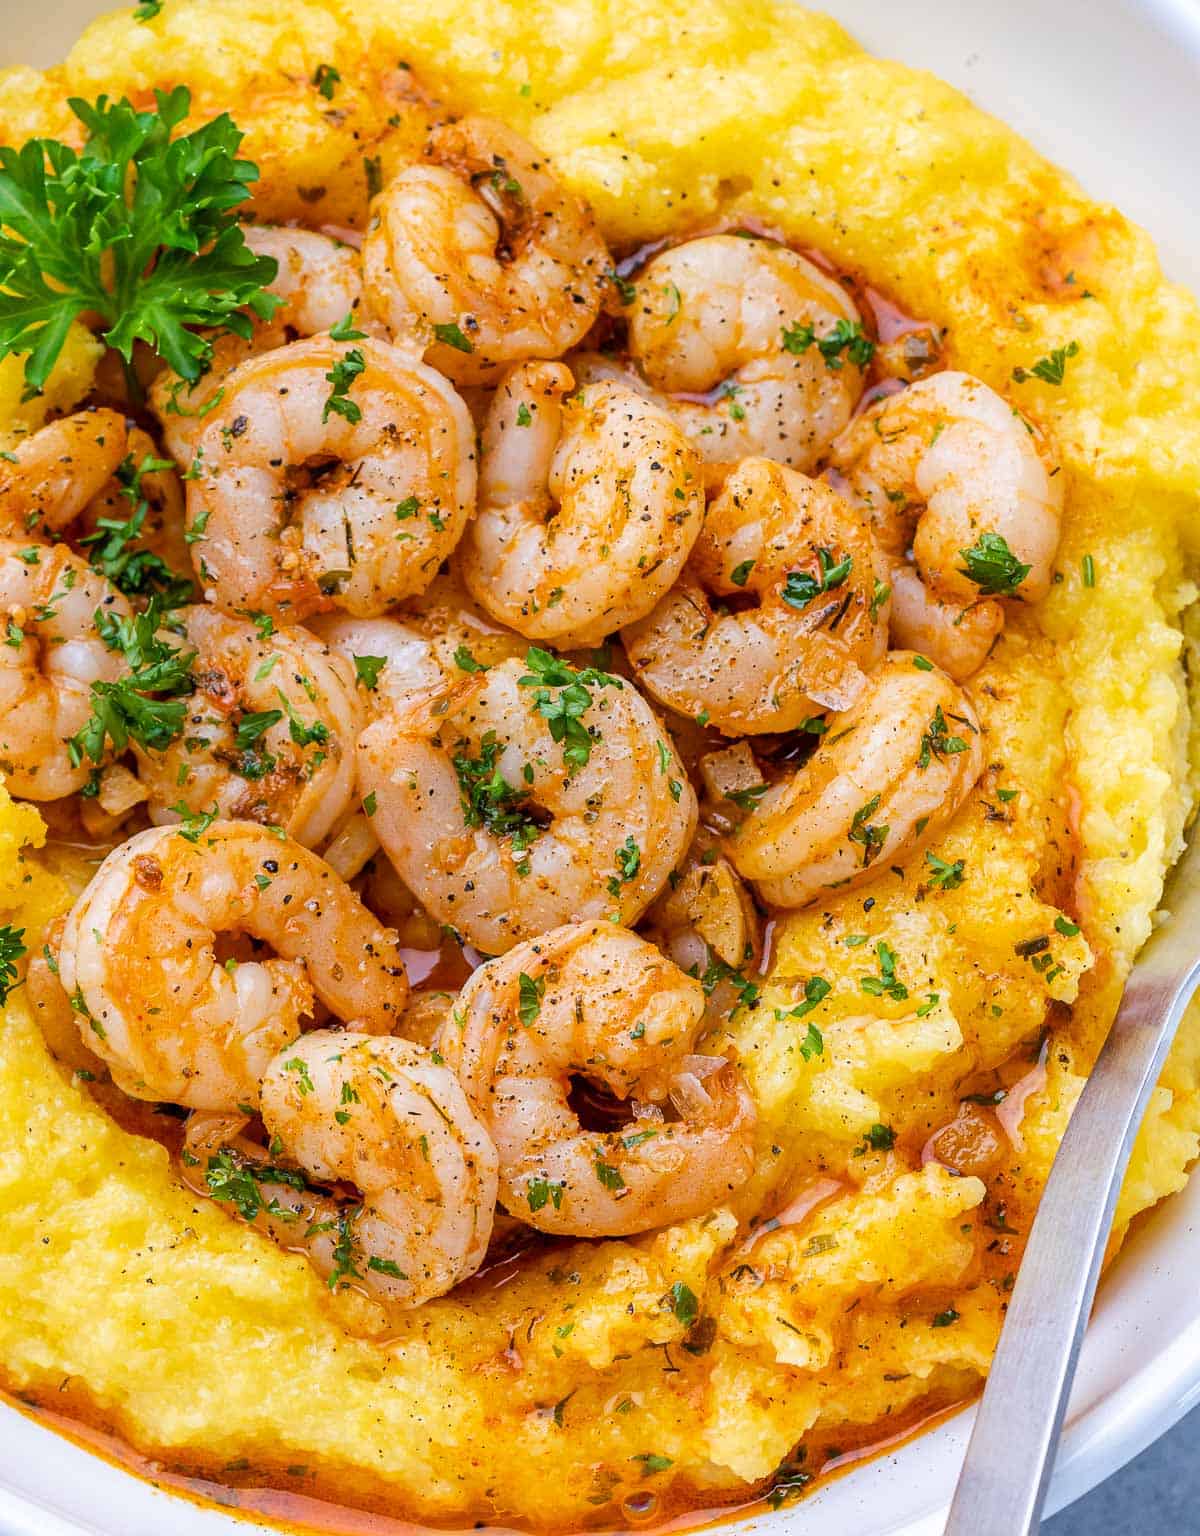 Closeup view of Shrimp and Grits garnished with fresh parsley.